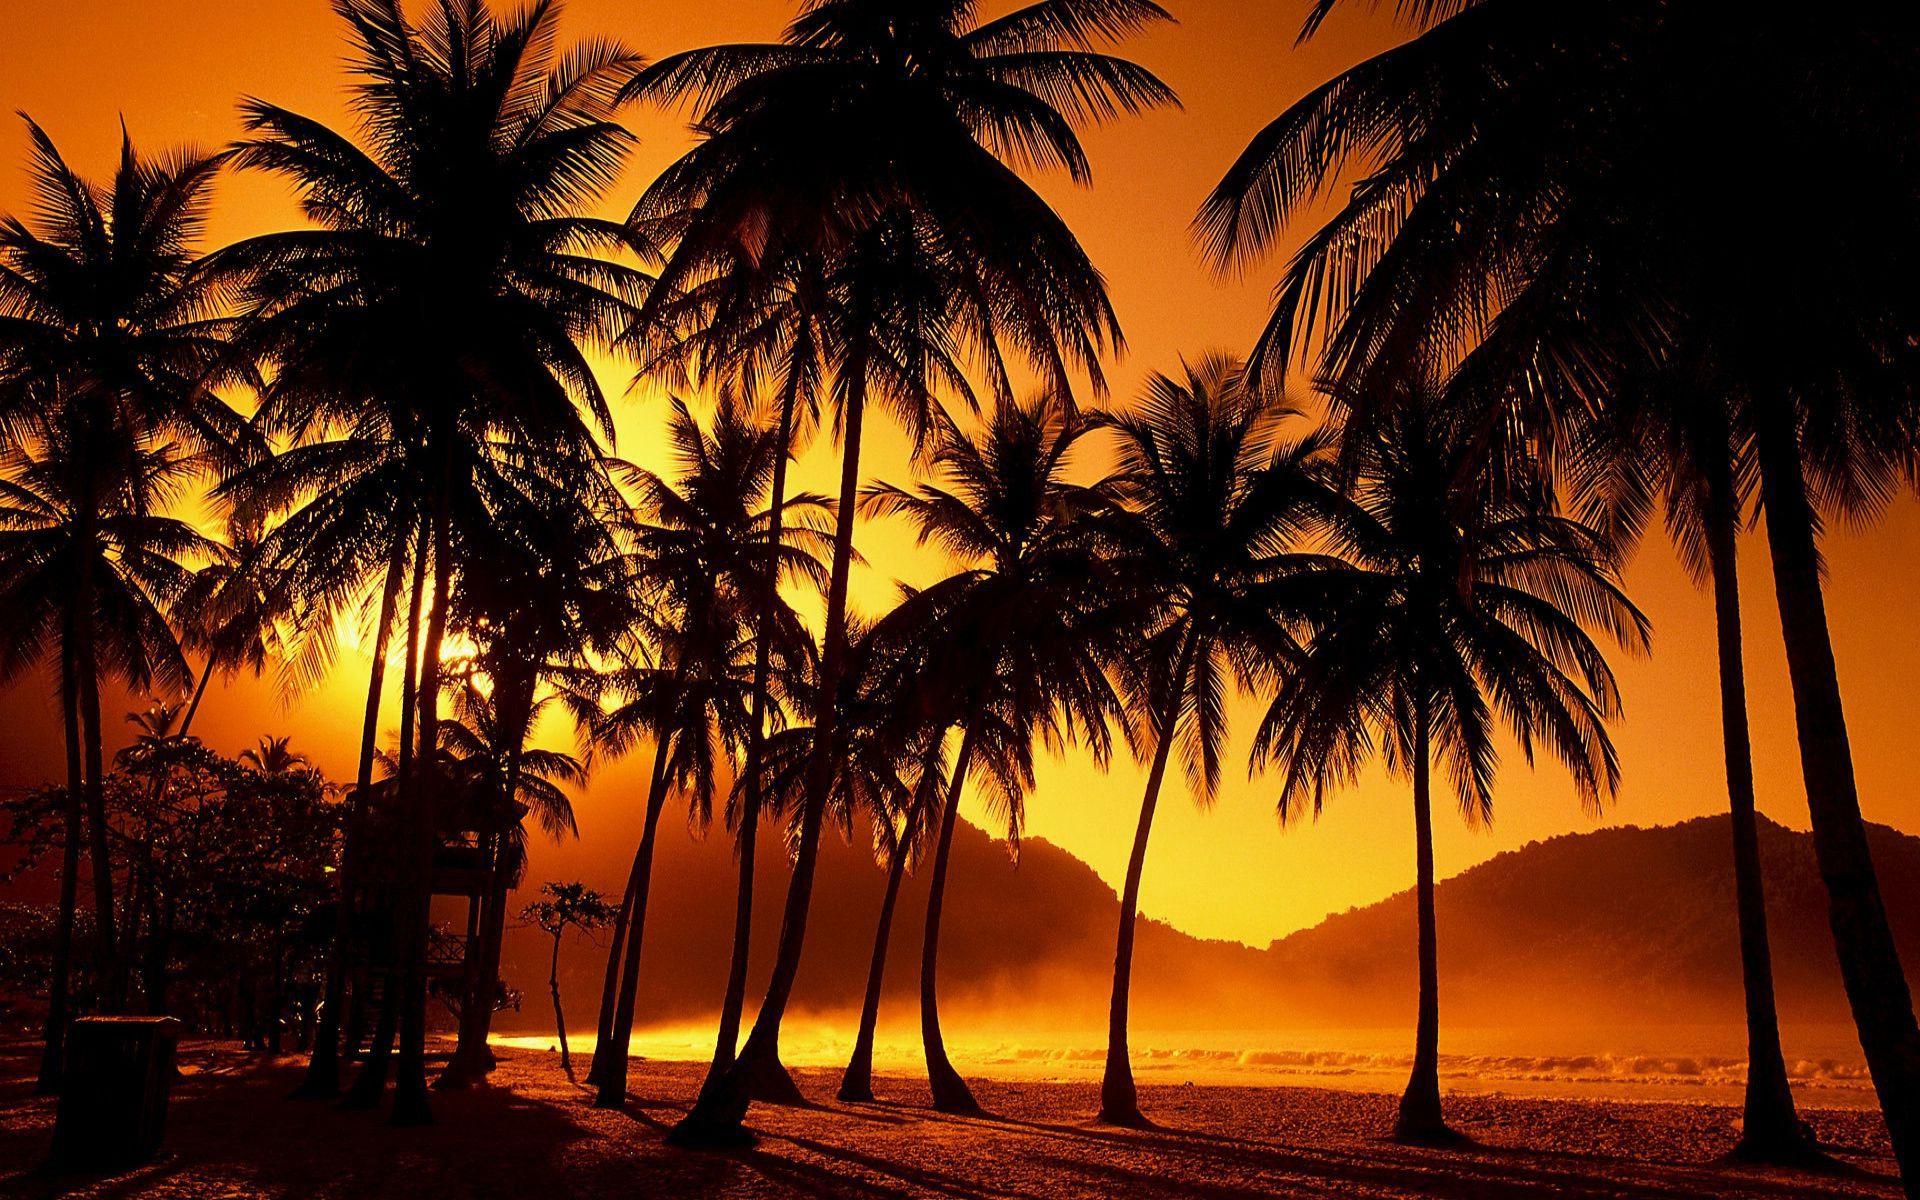 California Palm Trees Wallpapers - Top Free California Palm Trees